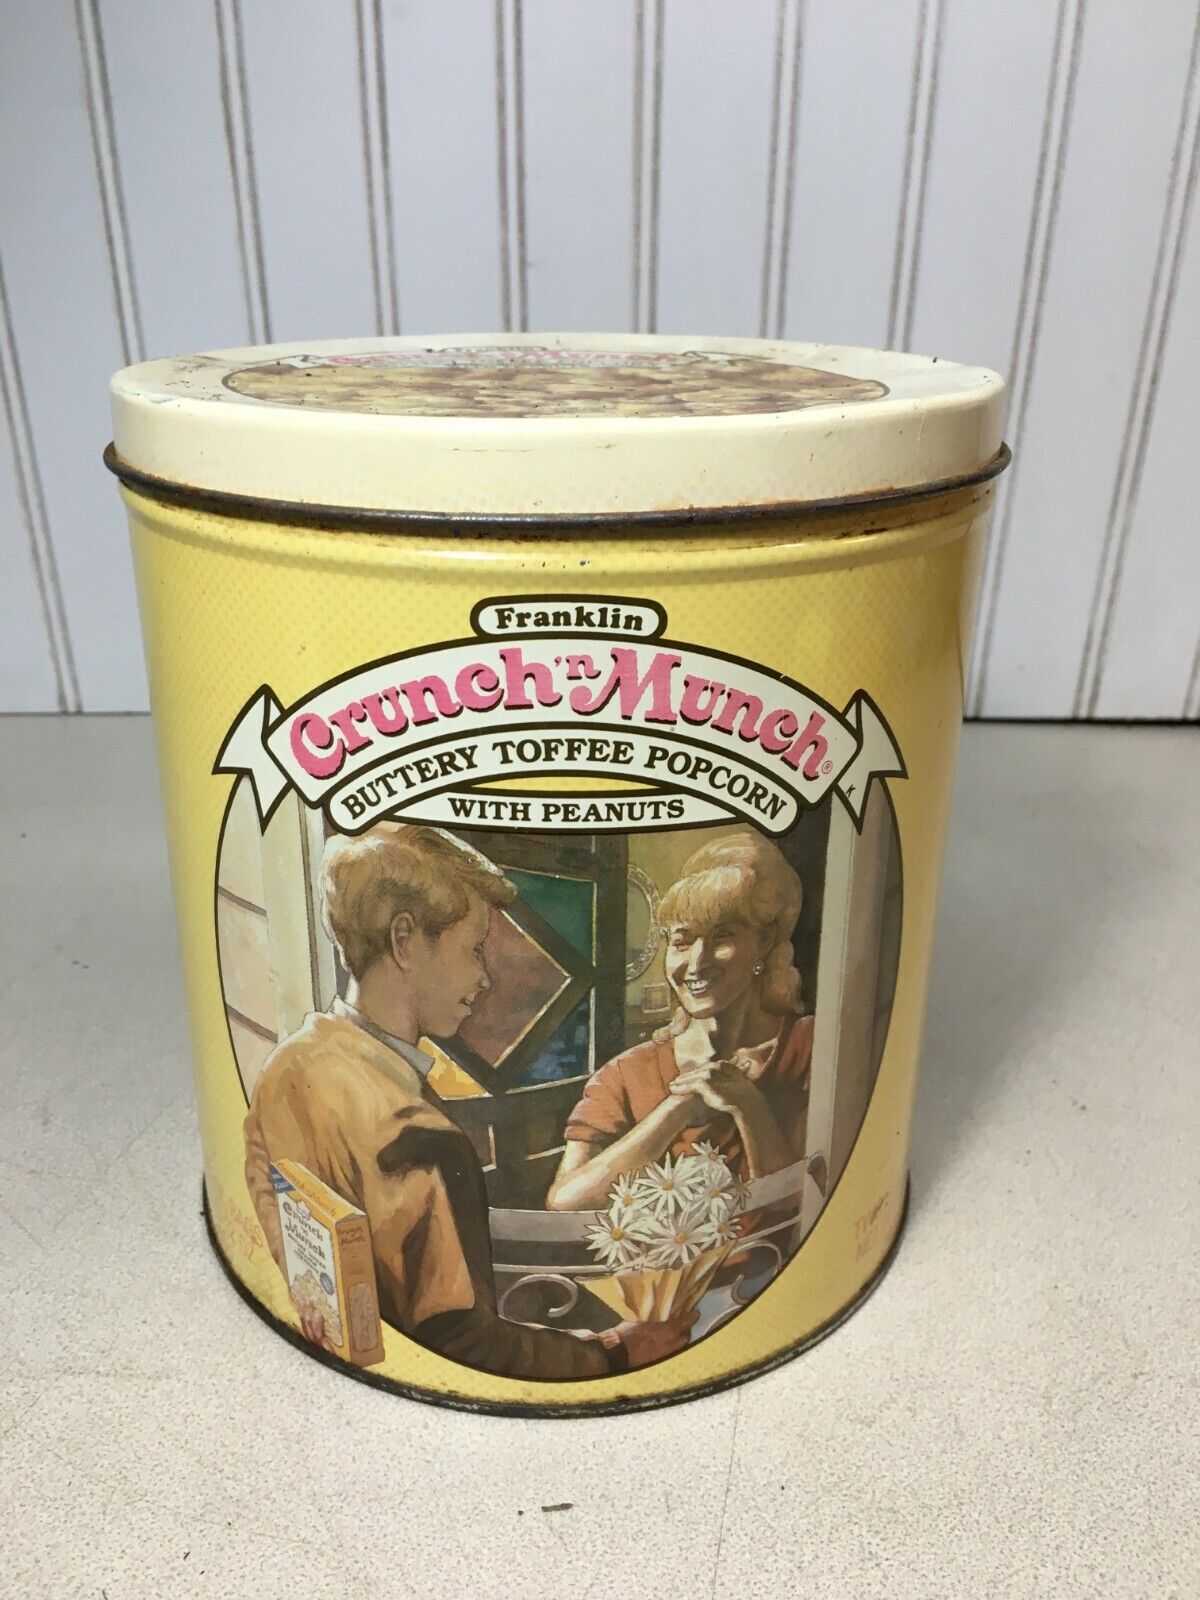 Franklin Metal Tin Can Crunch 'n Munch Buttery Toffee Popcorn Advertising Ads